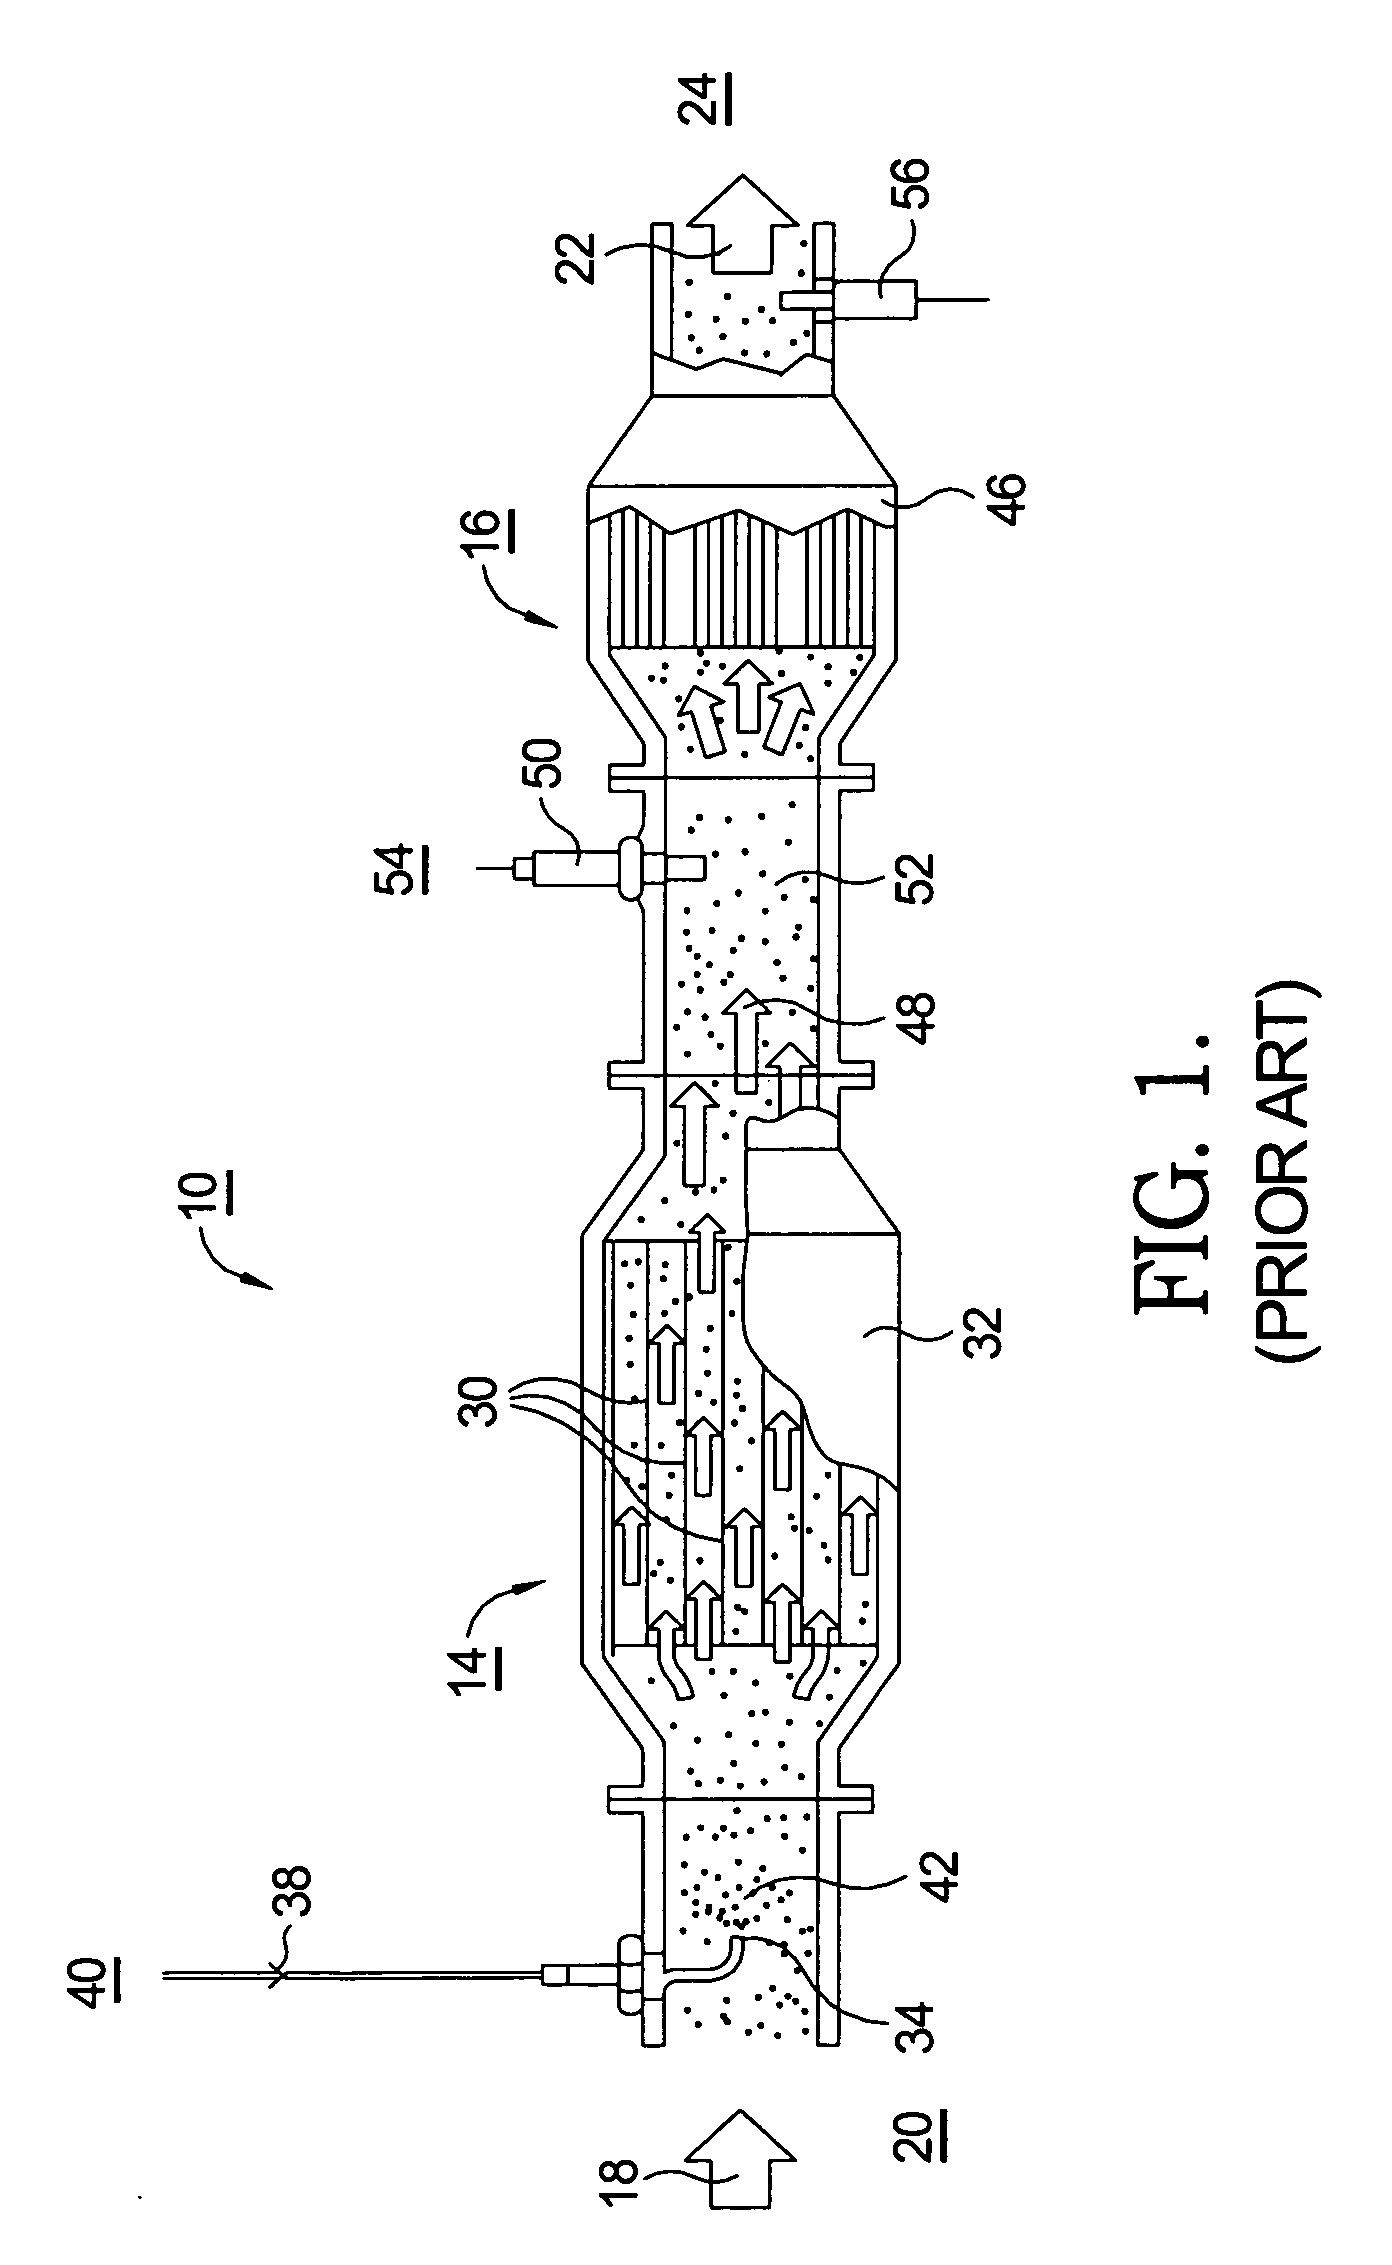 Selective NOx catalytic reduction system including an ammonia sensor